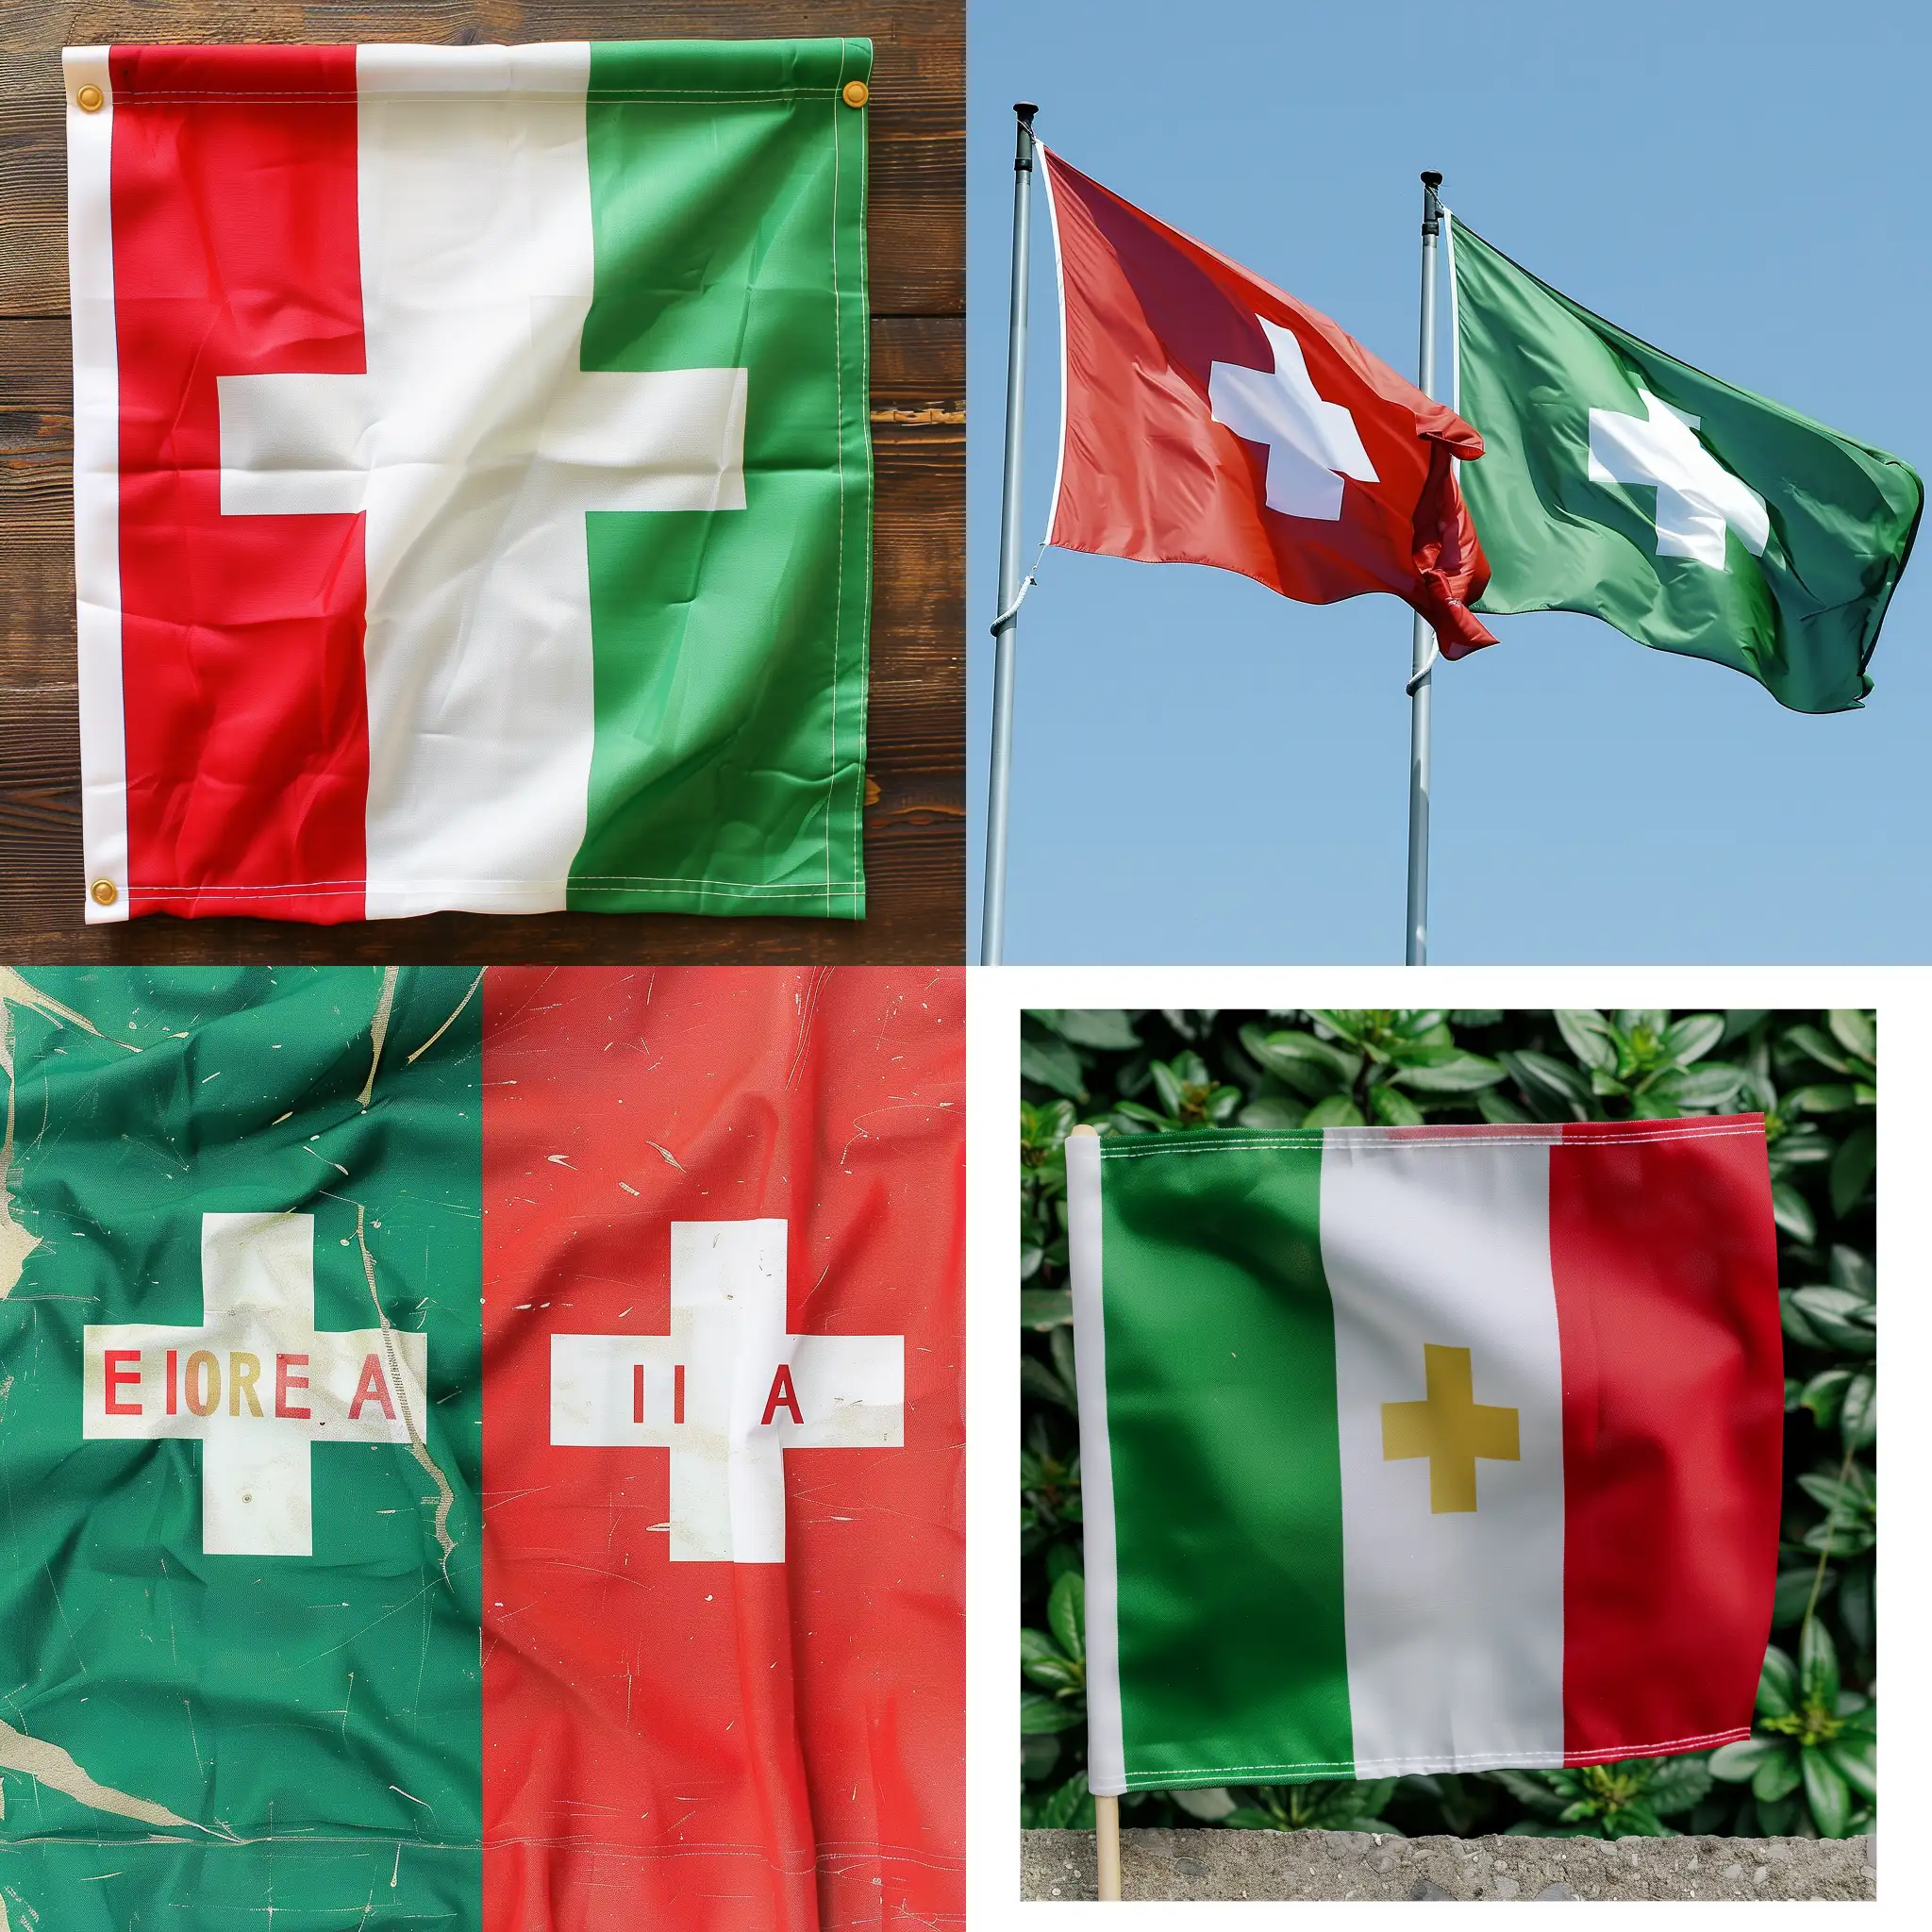 Flags-of-Italy-and-Switzerland-with-Text-Forza-Italy-and-Hopp-Switzerland